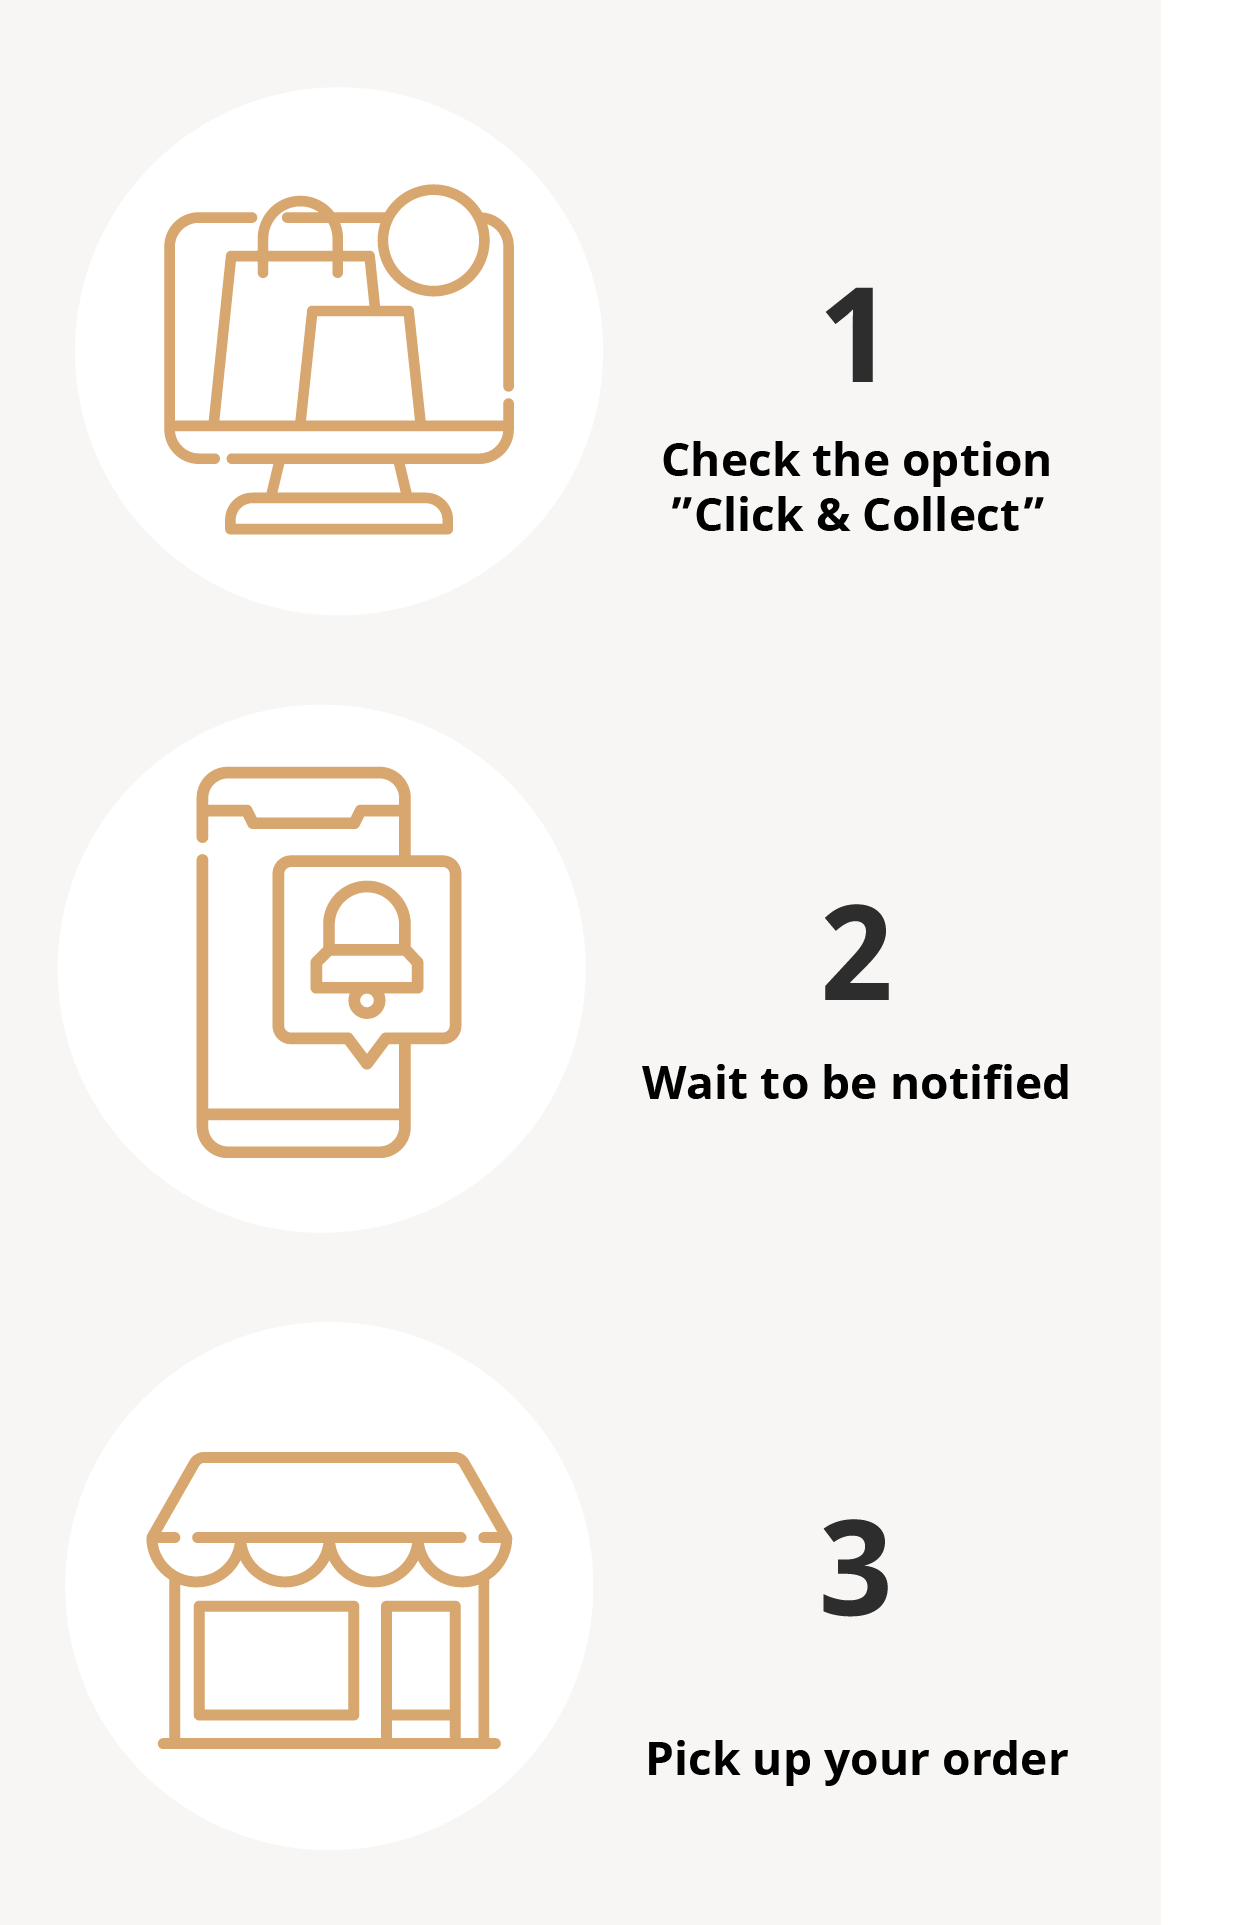 click & collect 3 step process: 1 check the option Click & Collect, 2 wait to be notified, 3 pick up your order